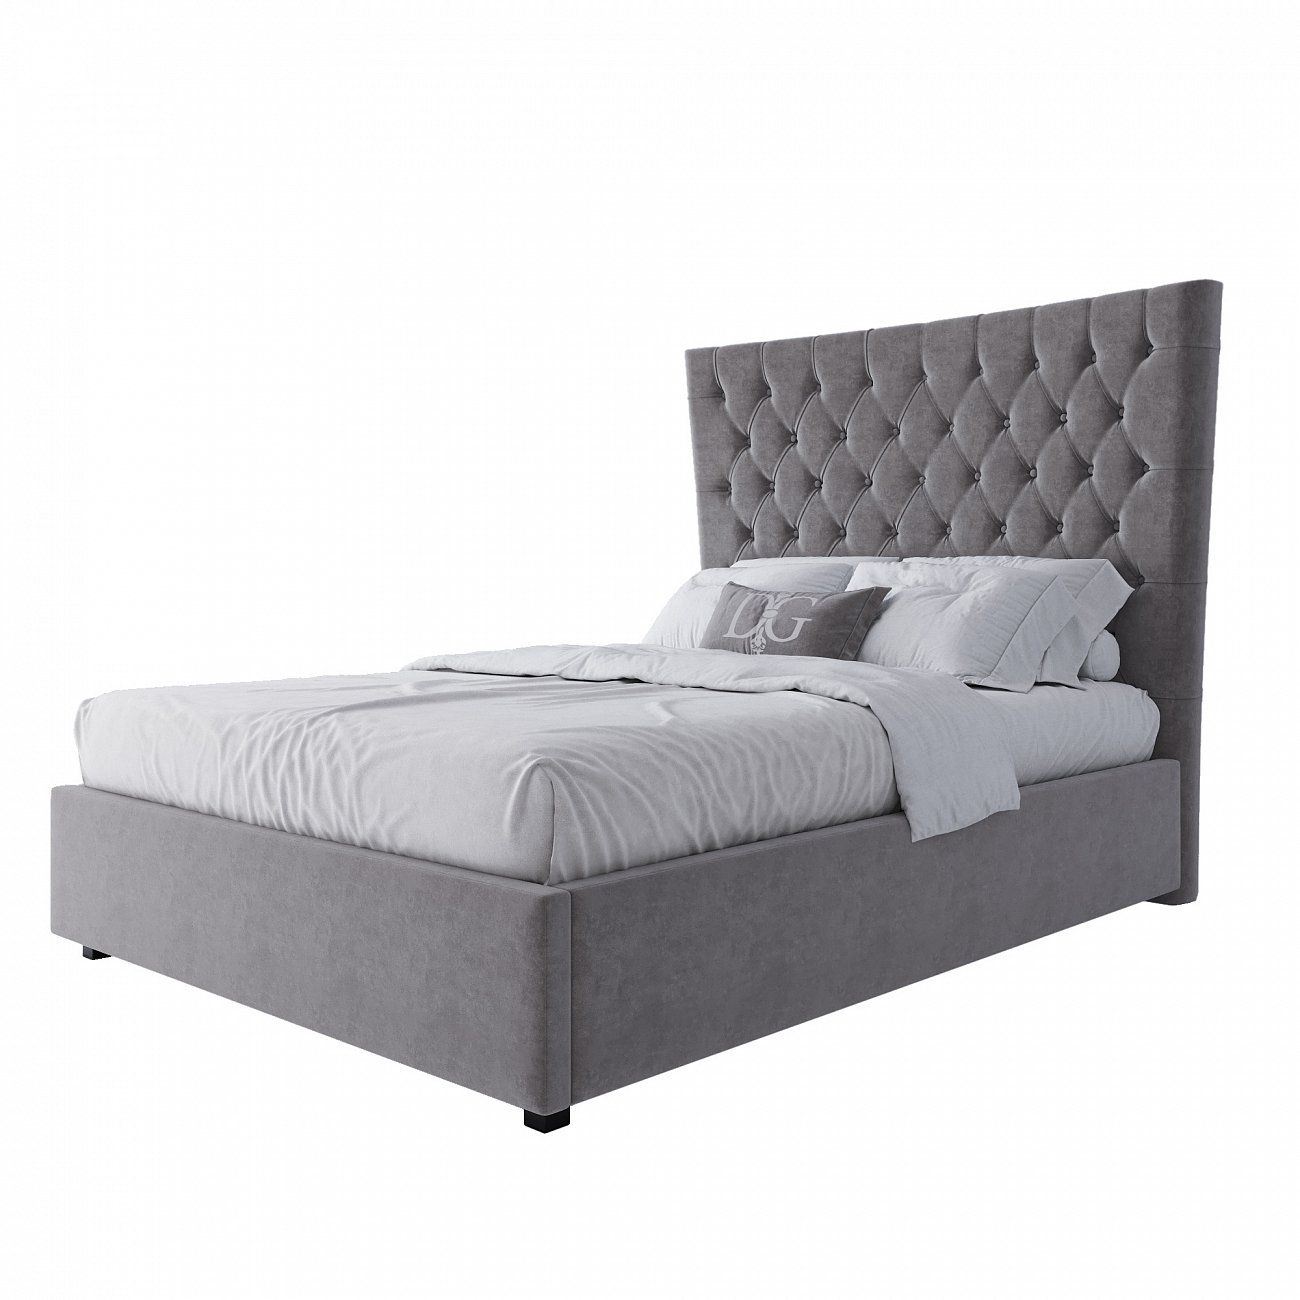 Teenage bed with a soft headboard 140x200 cm brown-gray QuickSand